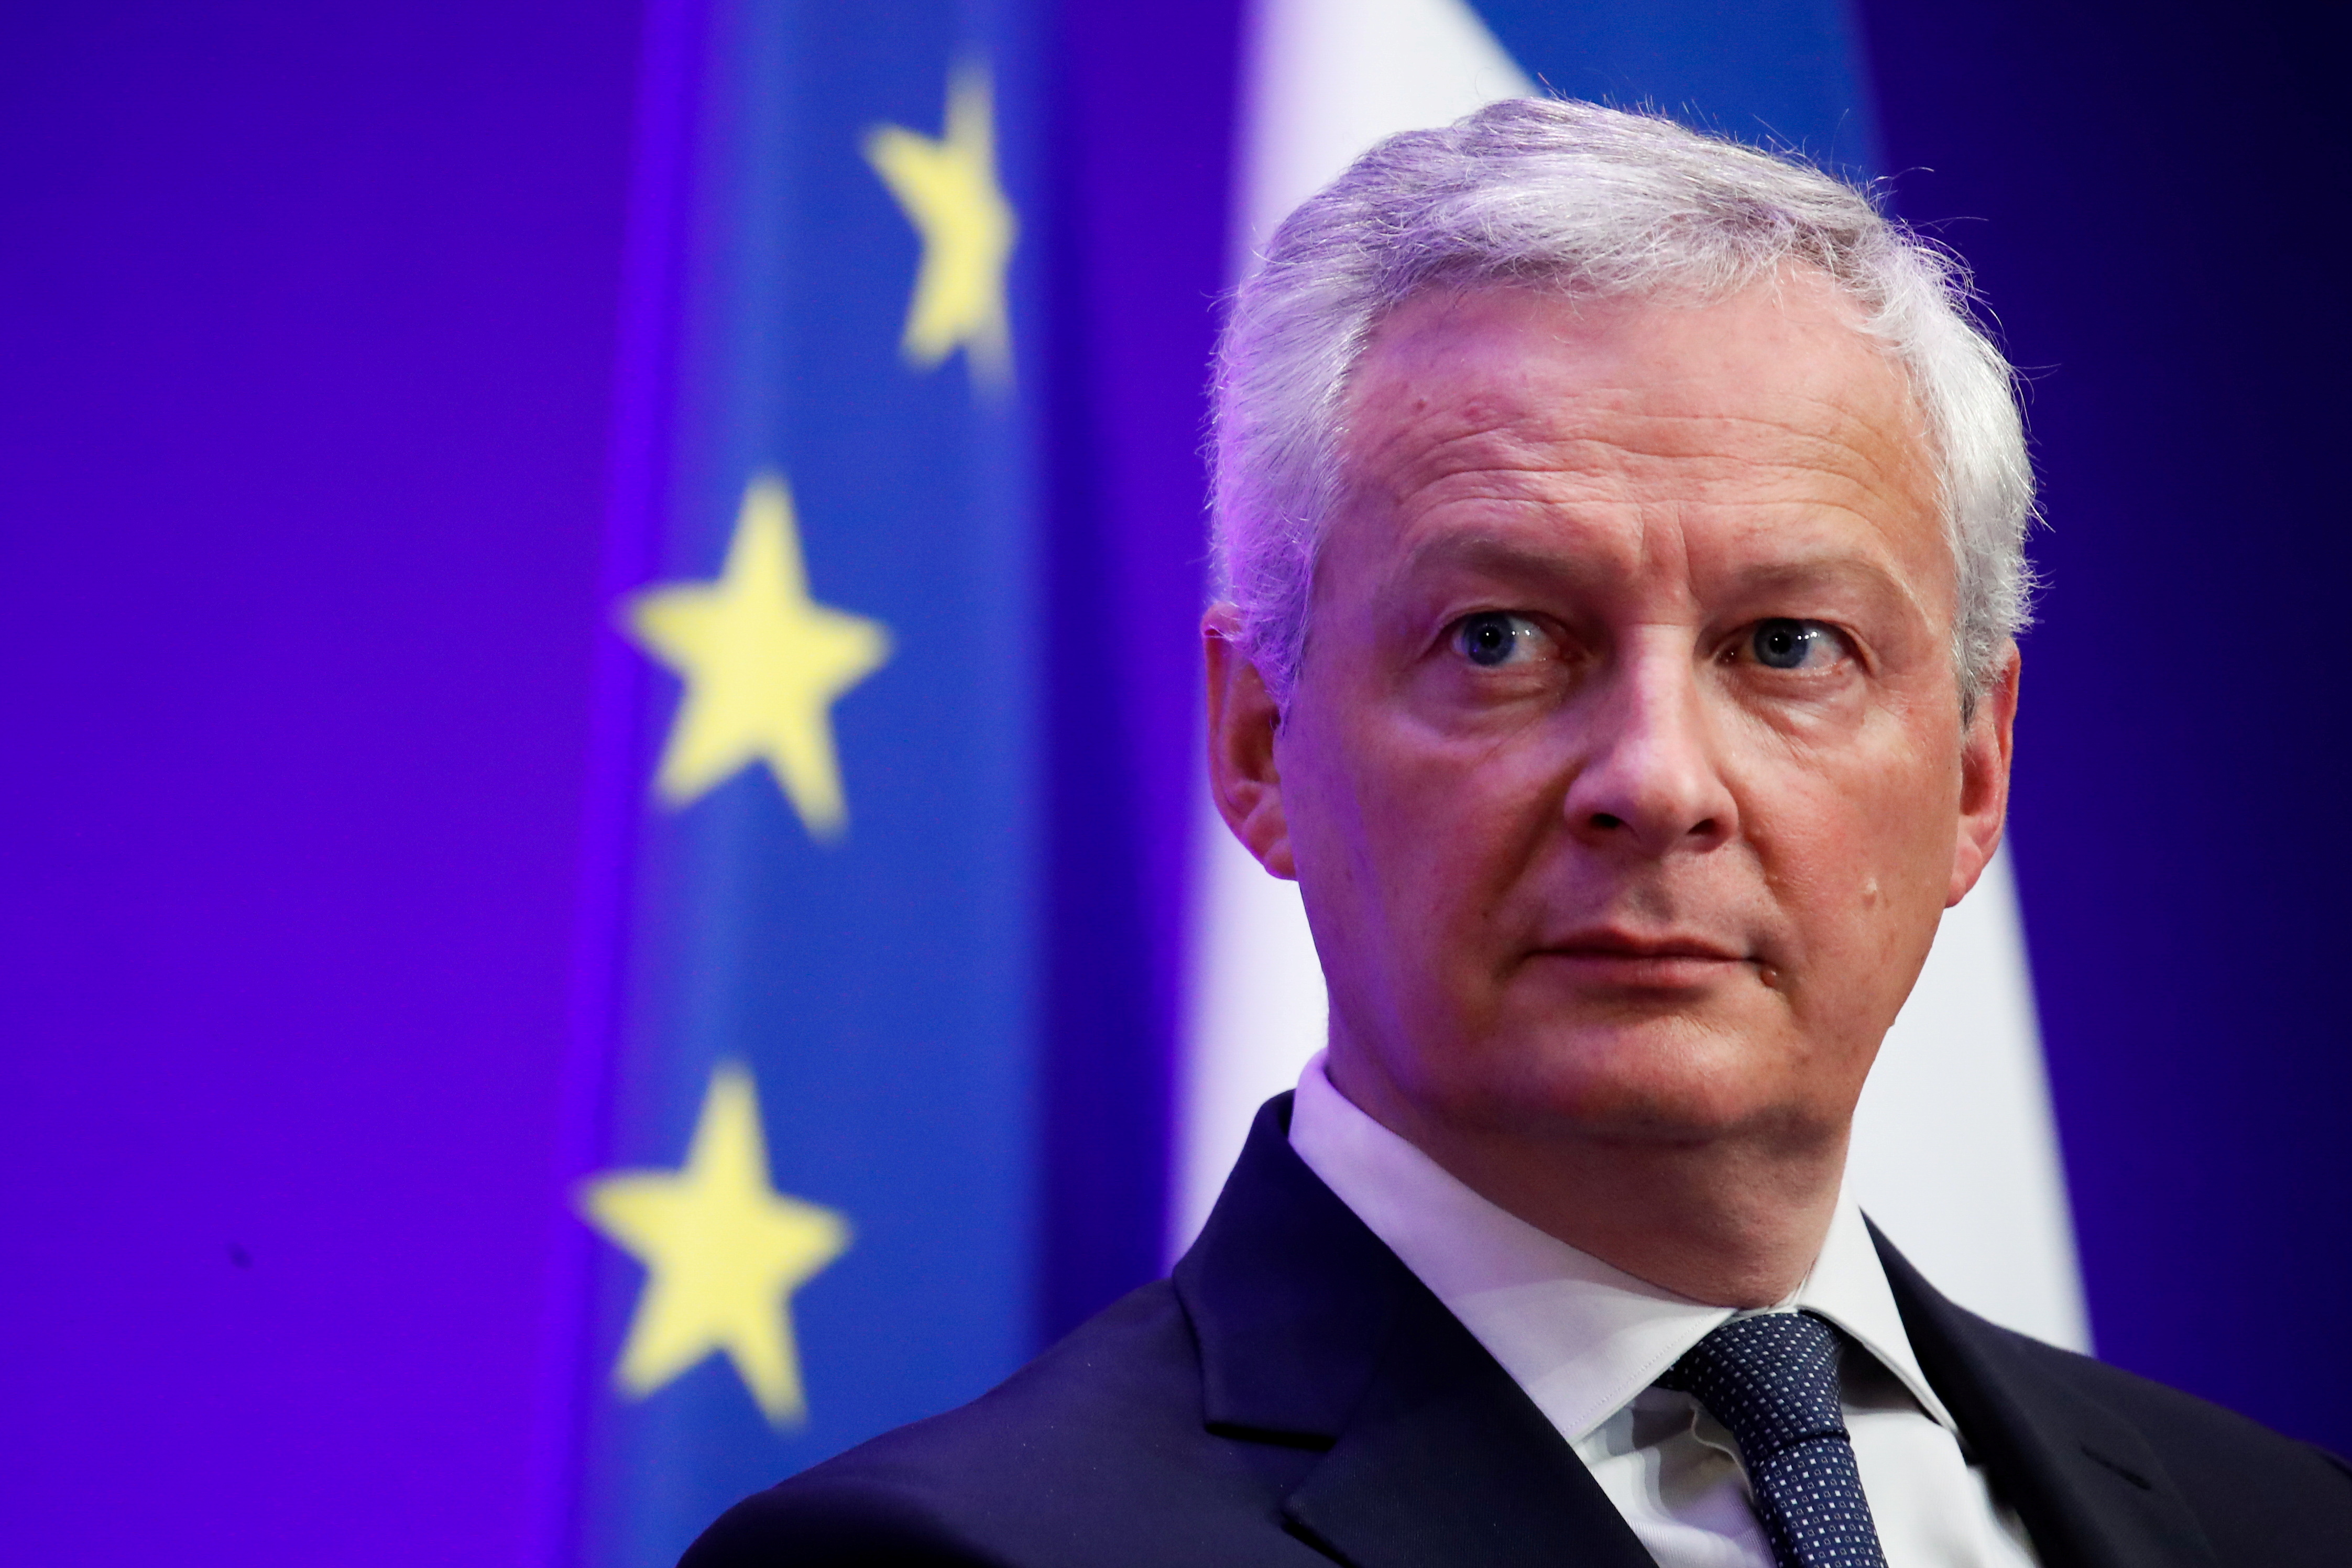 French Economy and Finance Minister Bruno Le Maire attends a news conference to present the French government 2022 budget at the Bercy Finance Ministry in Paris, France, September 22, 2021. REUTERS/Gonzalo Fuentes